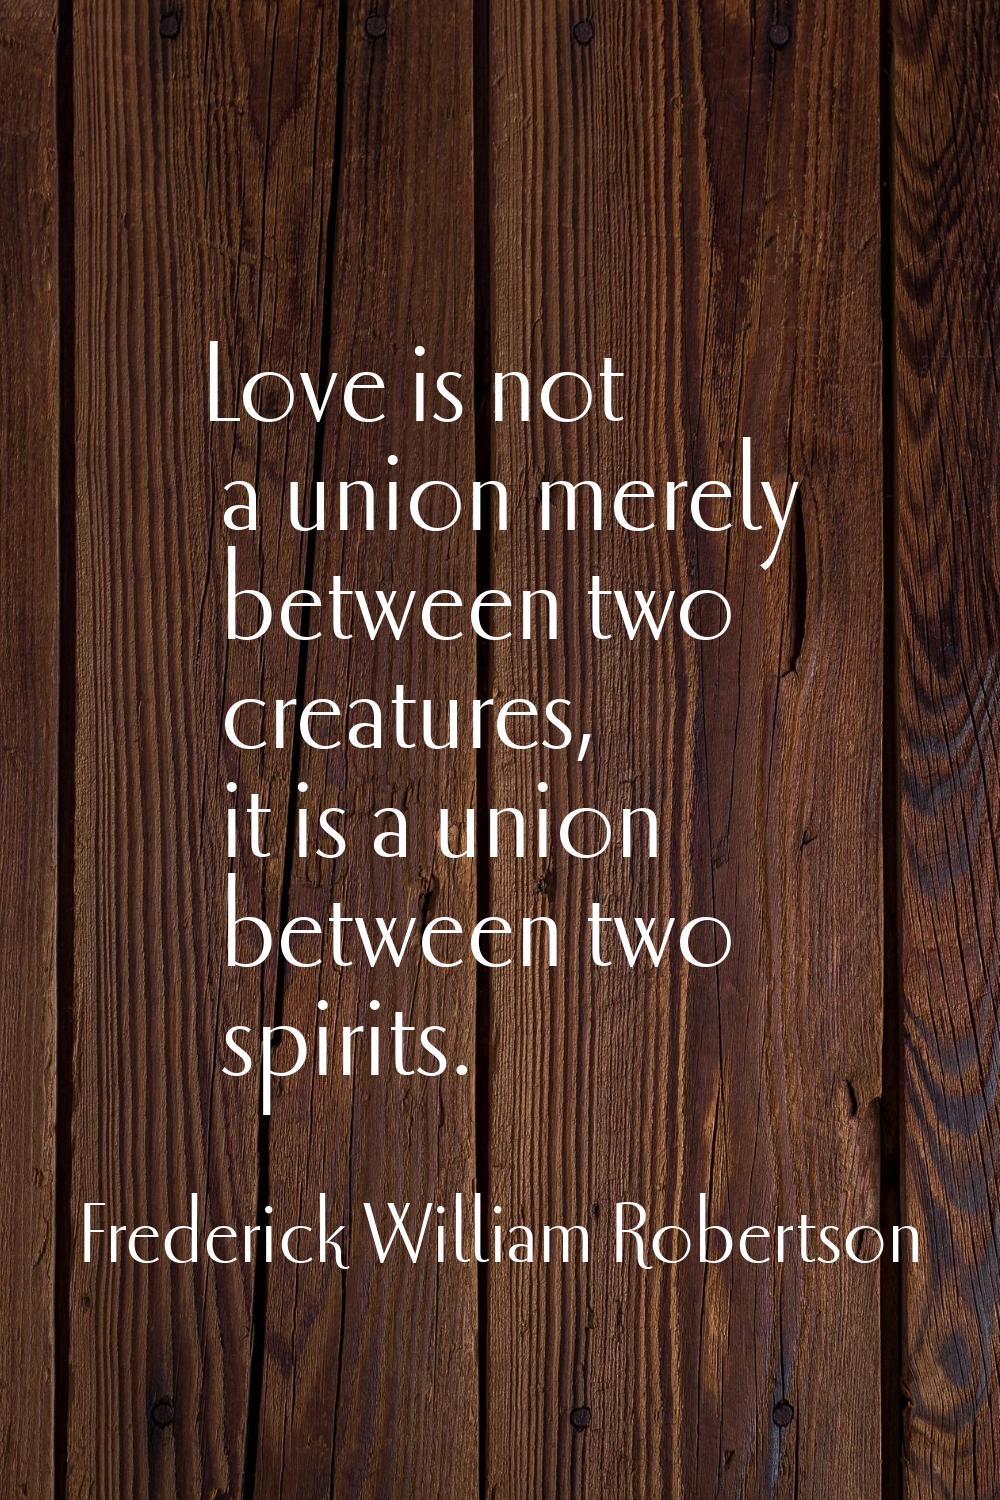 Love is not a union merely between two creatures, it is a union between two spirits.